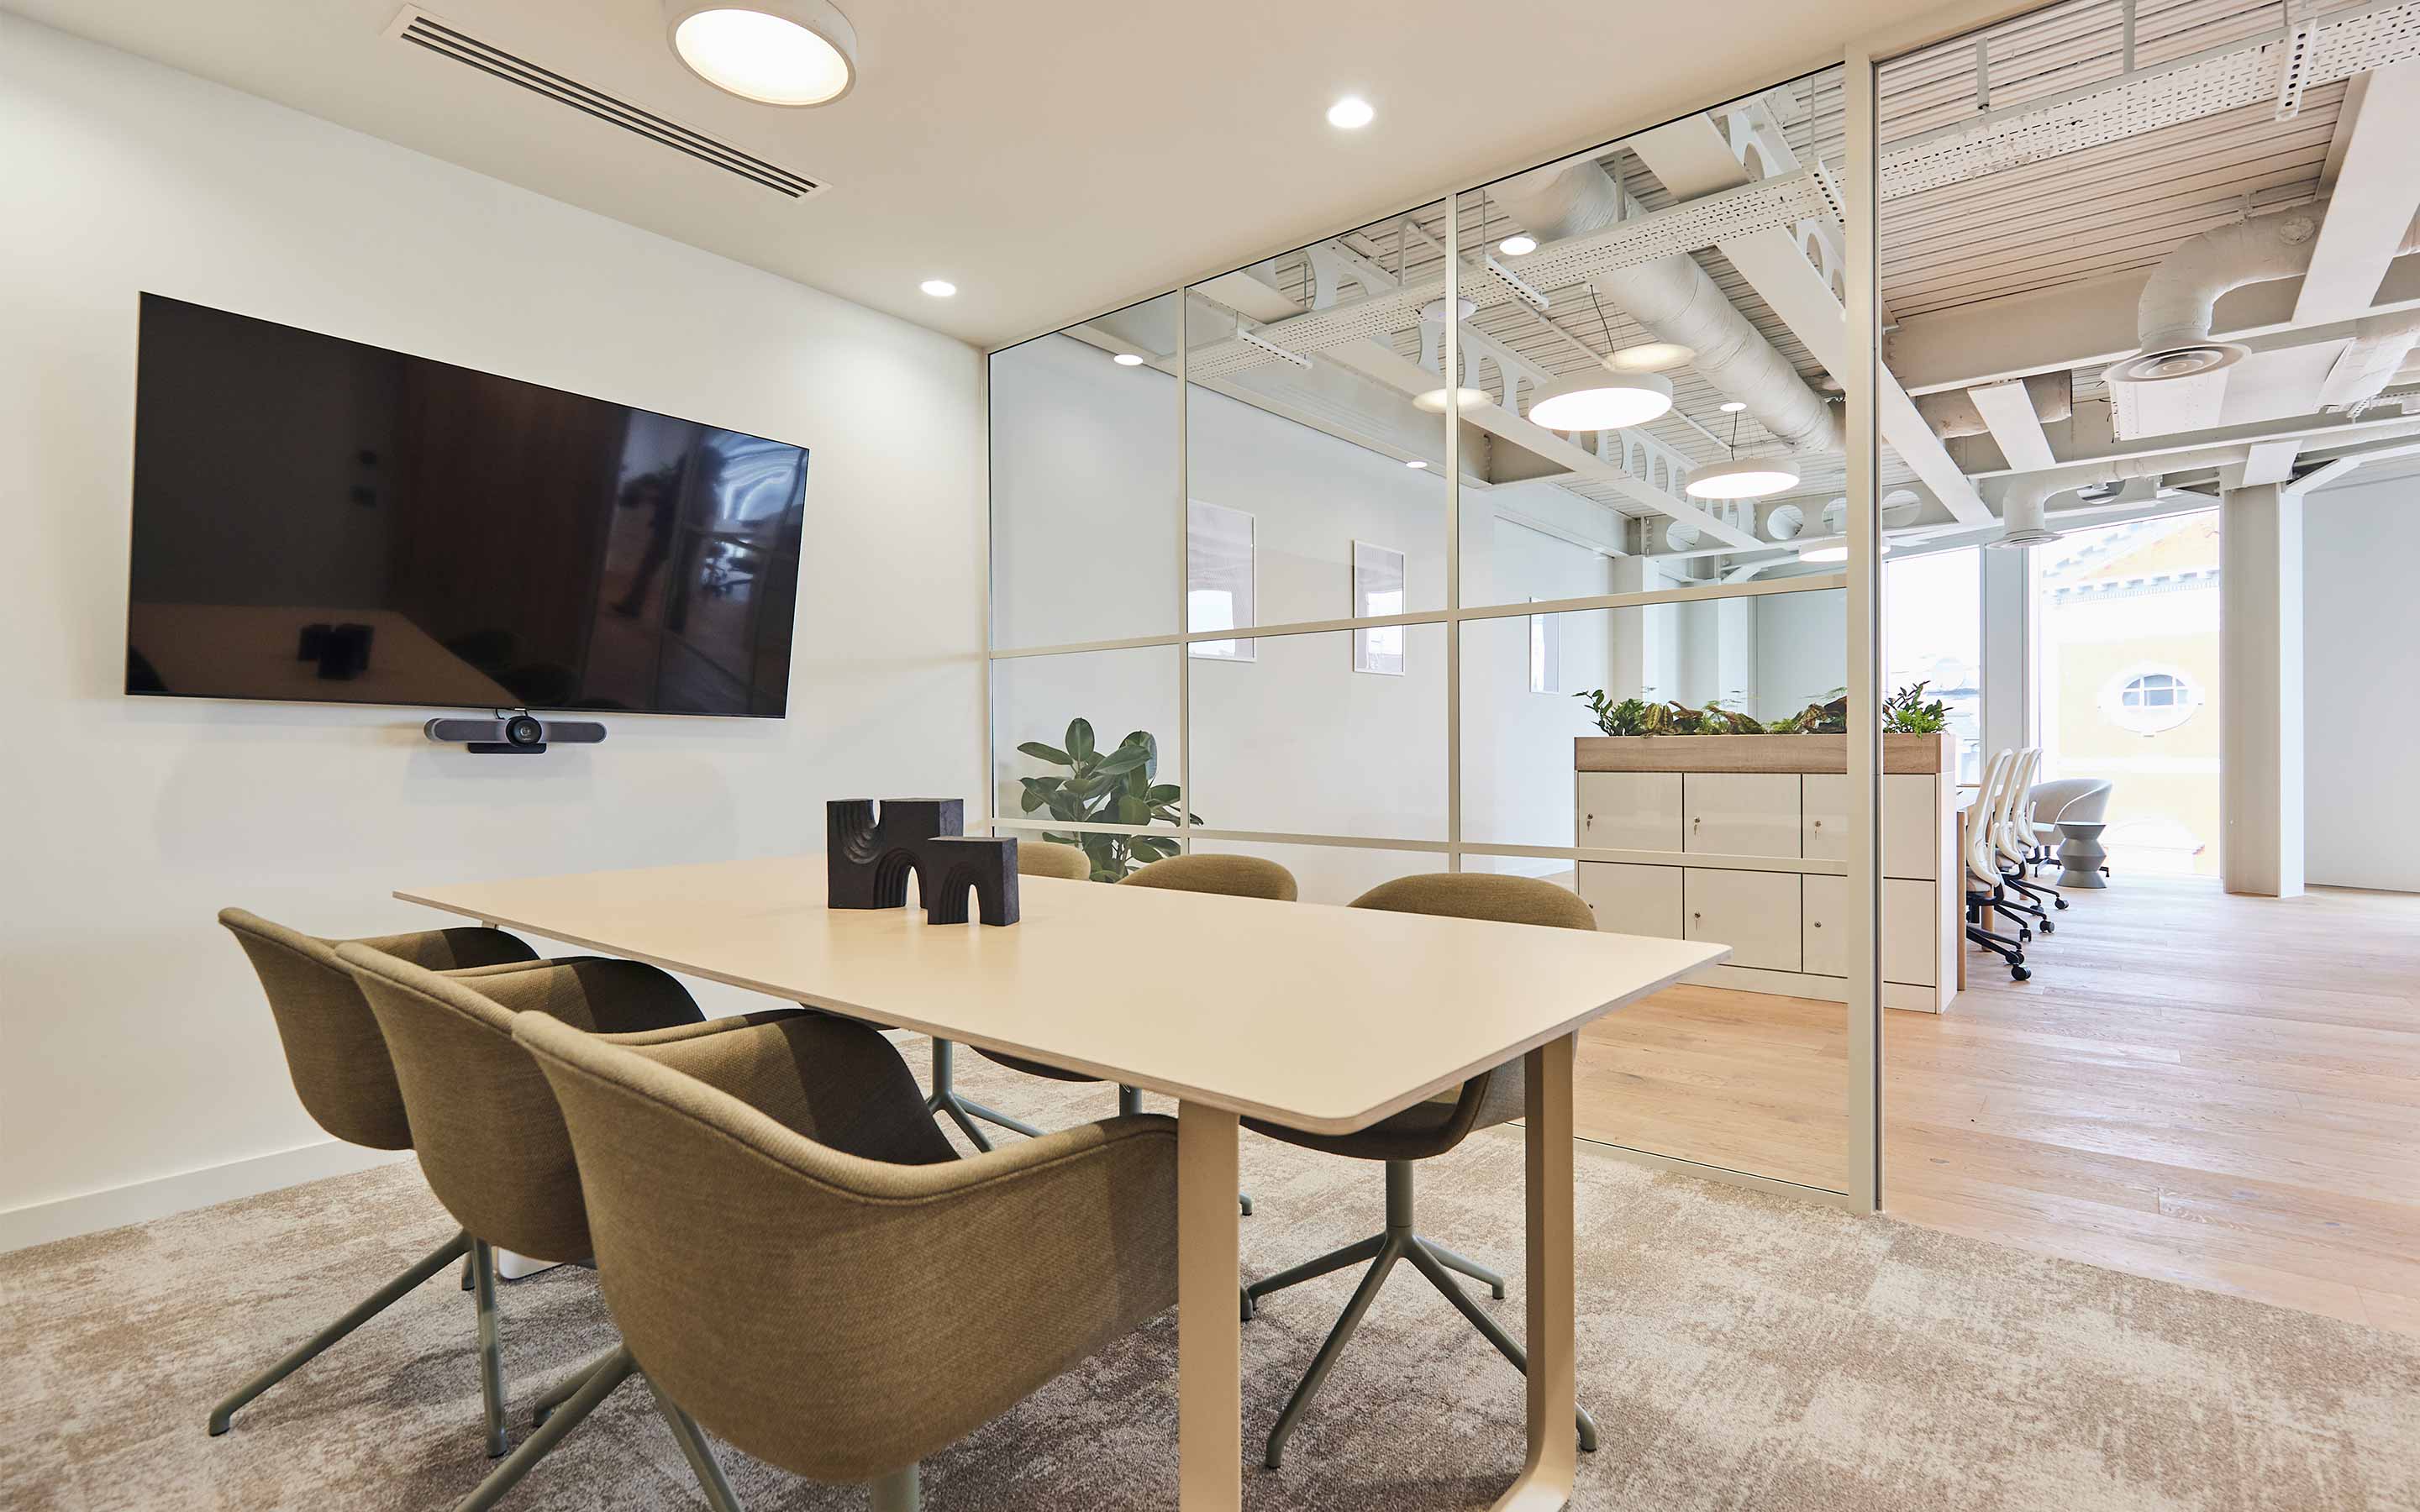 A meeting room in a modern office, with soft seating, a wall mounted TV screen, and glass walls